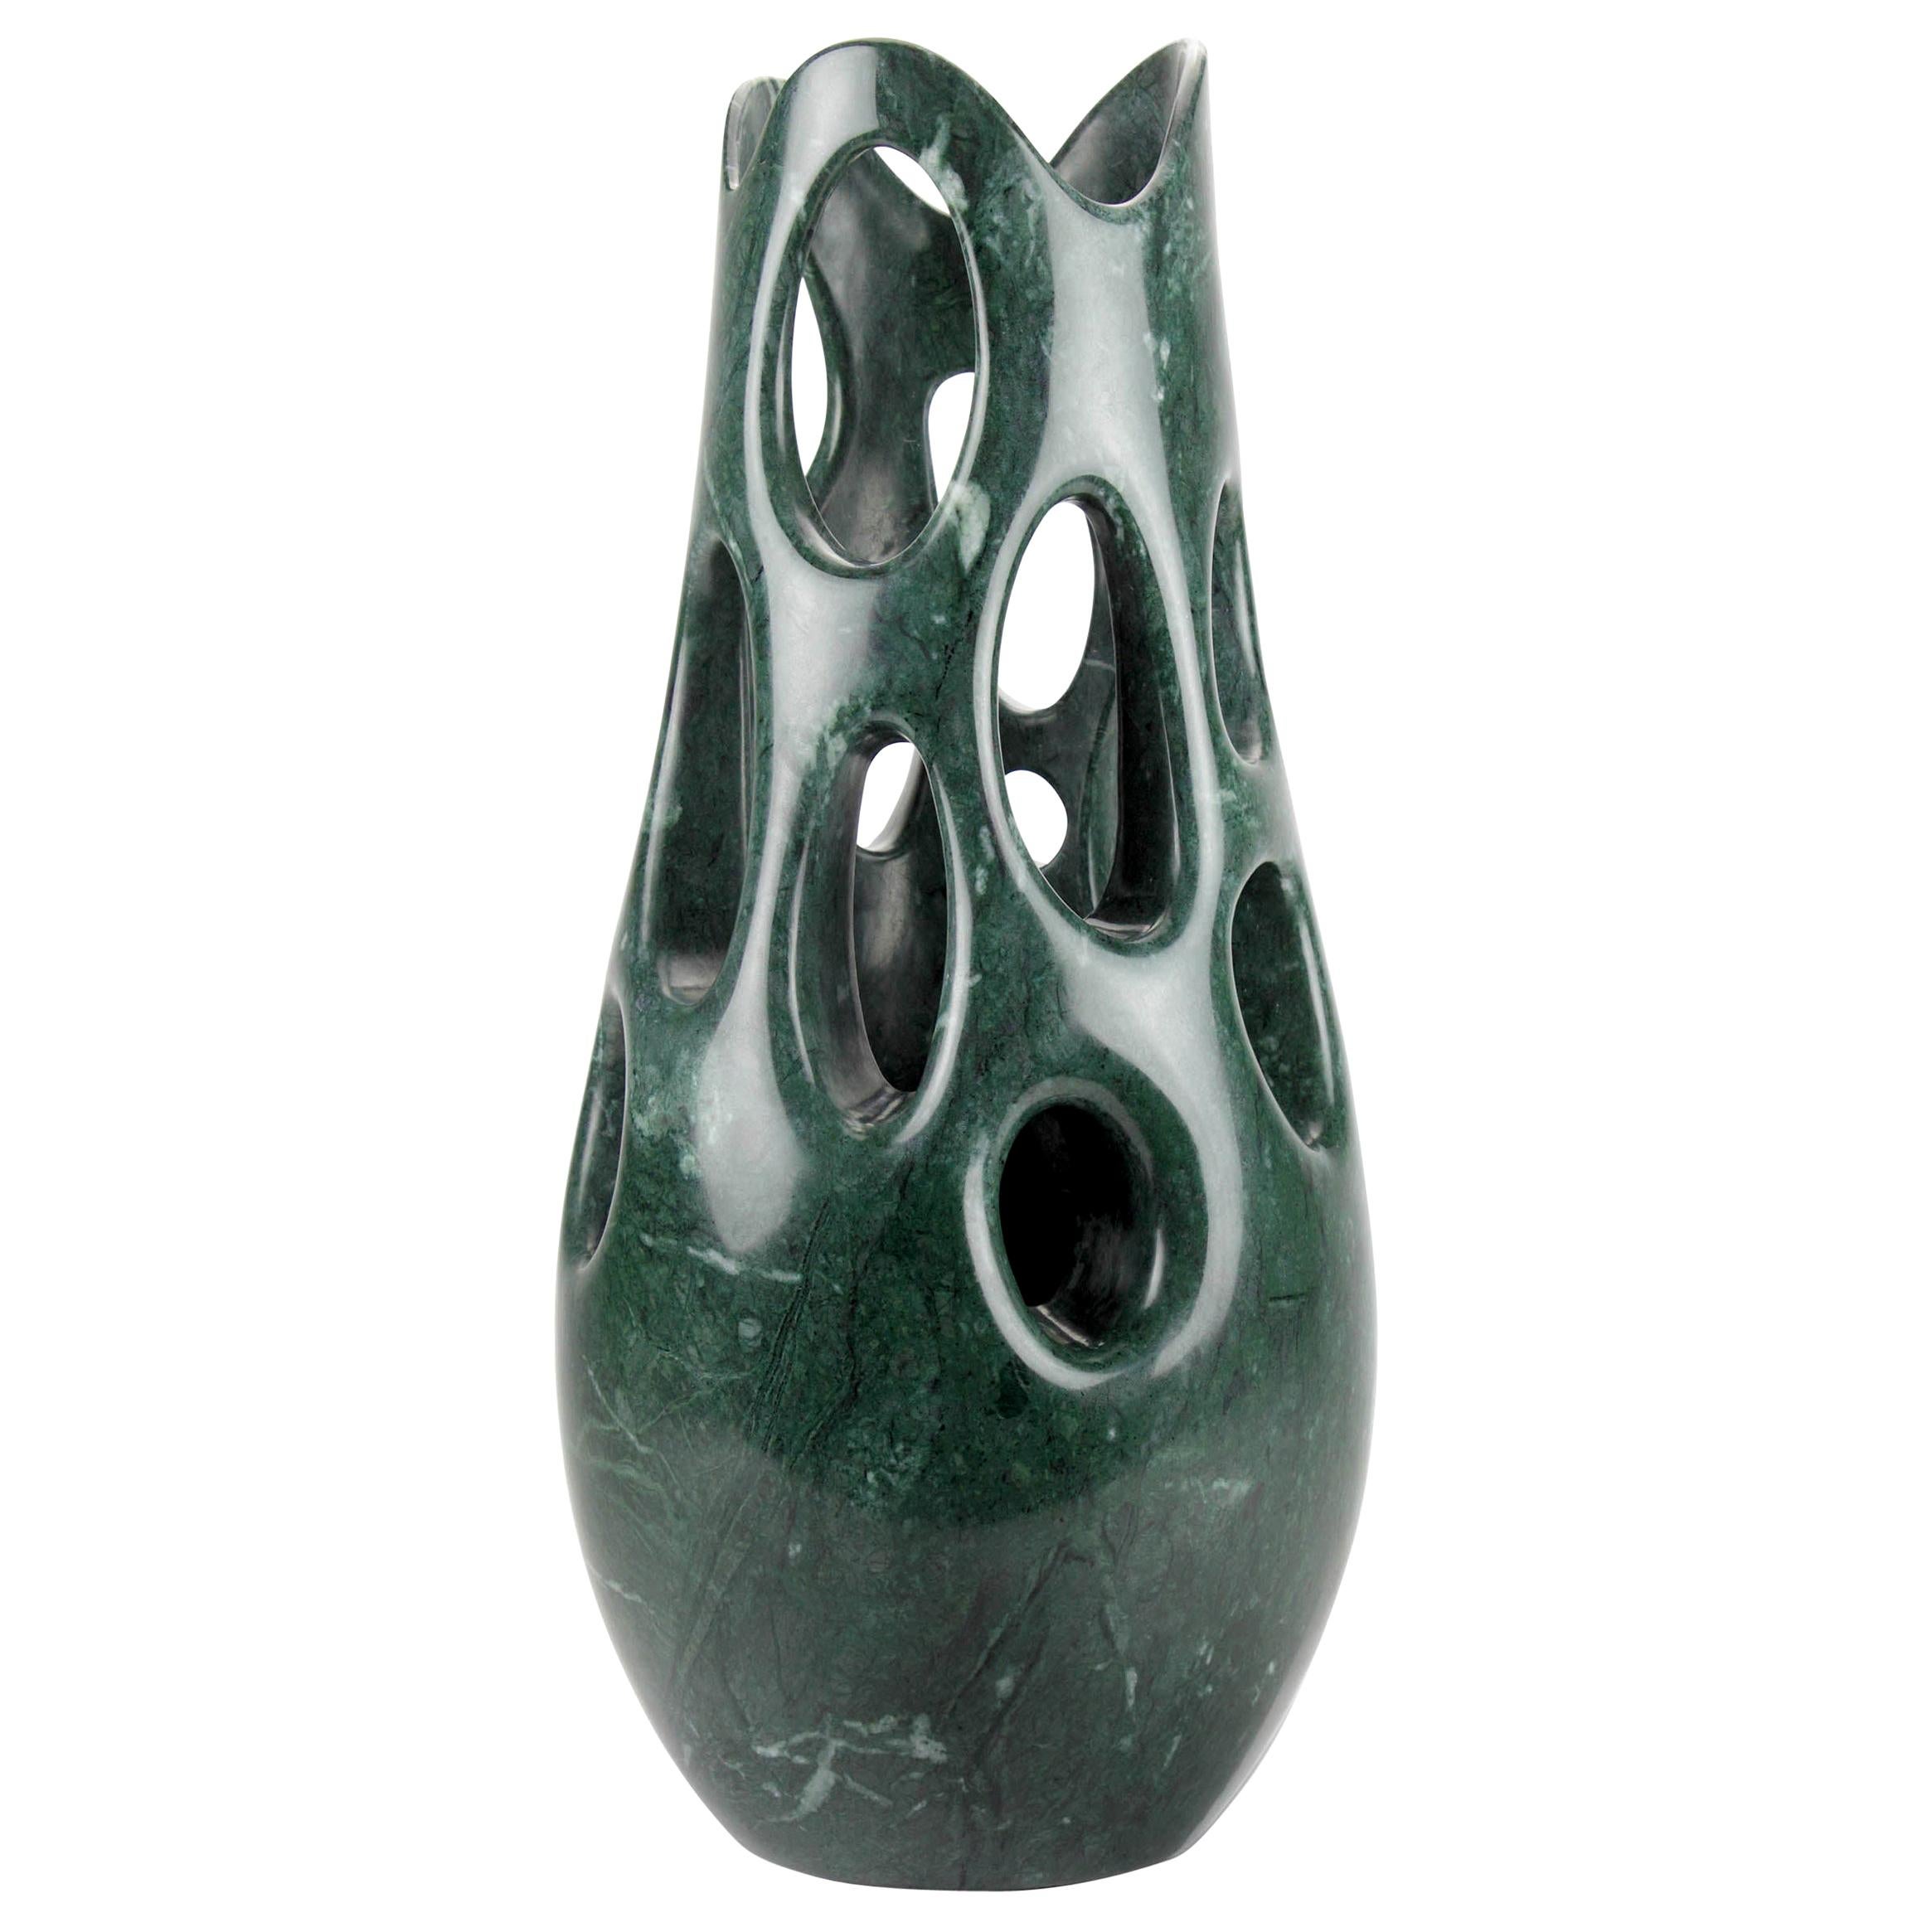 Vase Vessel Sculpture Organic Shape Solid Imperial Green Marble Handmade Italy